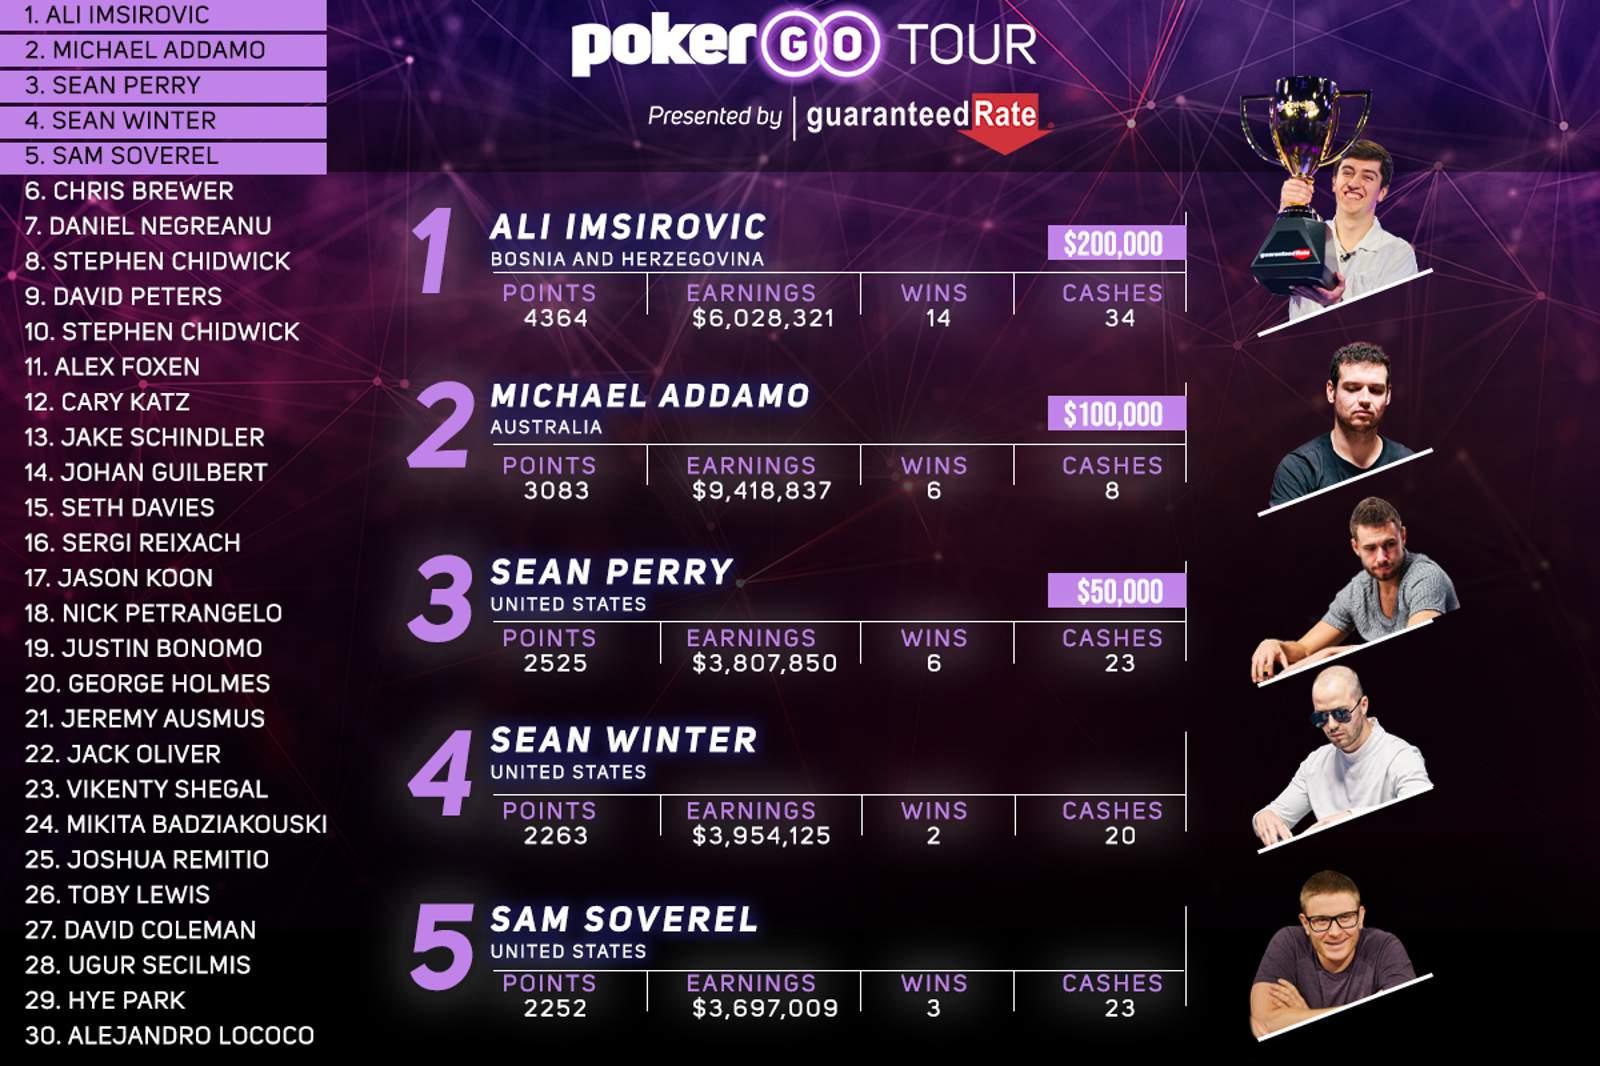 PokerGO Tour Concludes for 2021 with Ali Imsirovic, Michael Addamo, and Sean Perry Winning Top Prizes